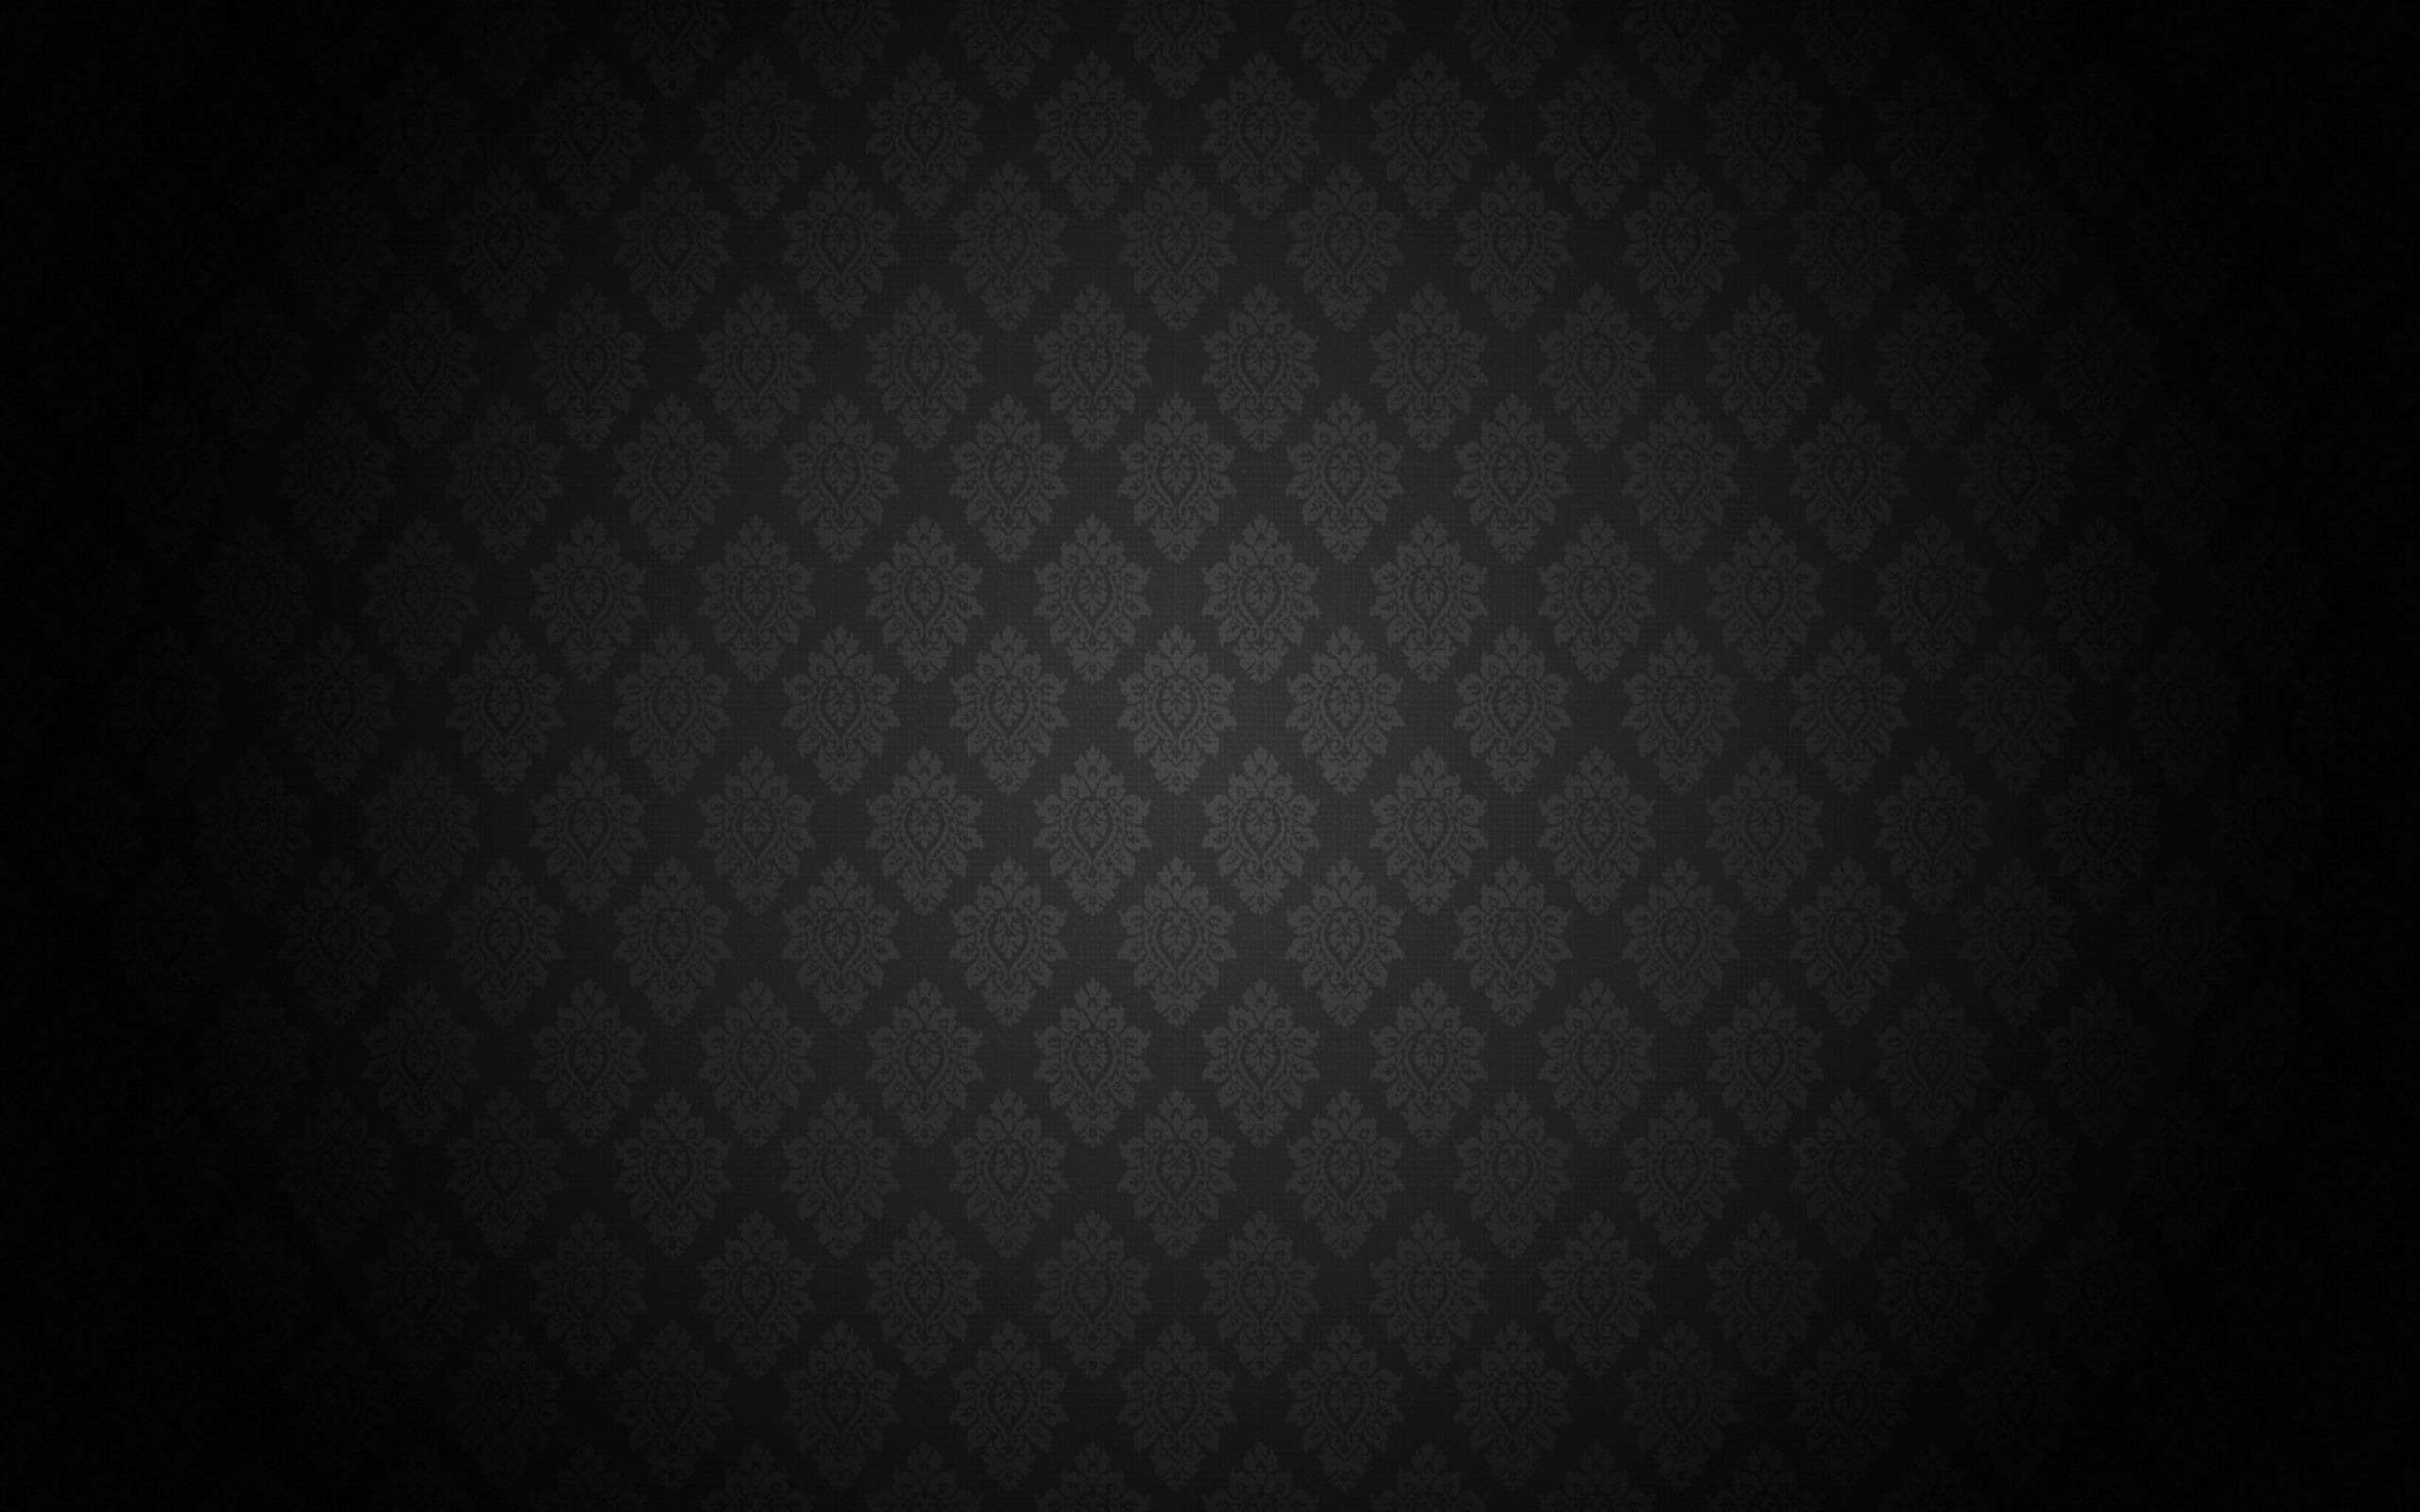 Black and White Pattern Background wallpaper Black and White Pattern 2560x1600